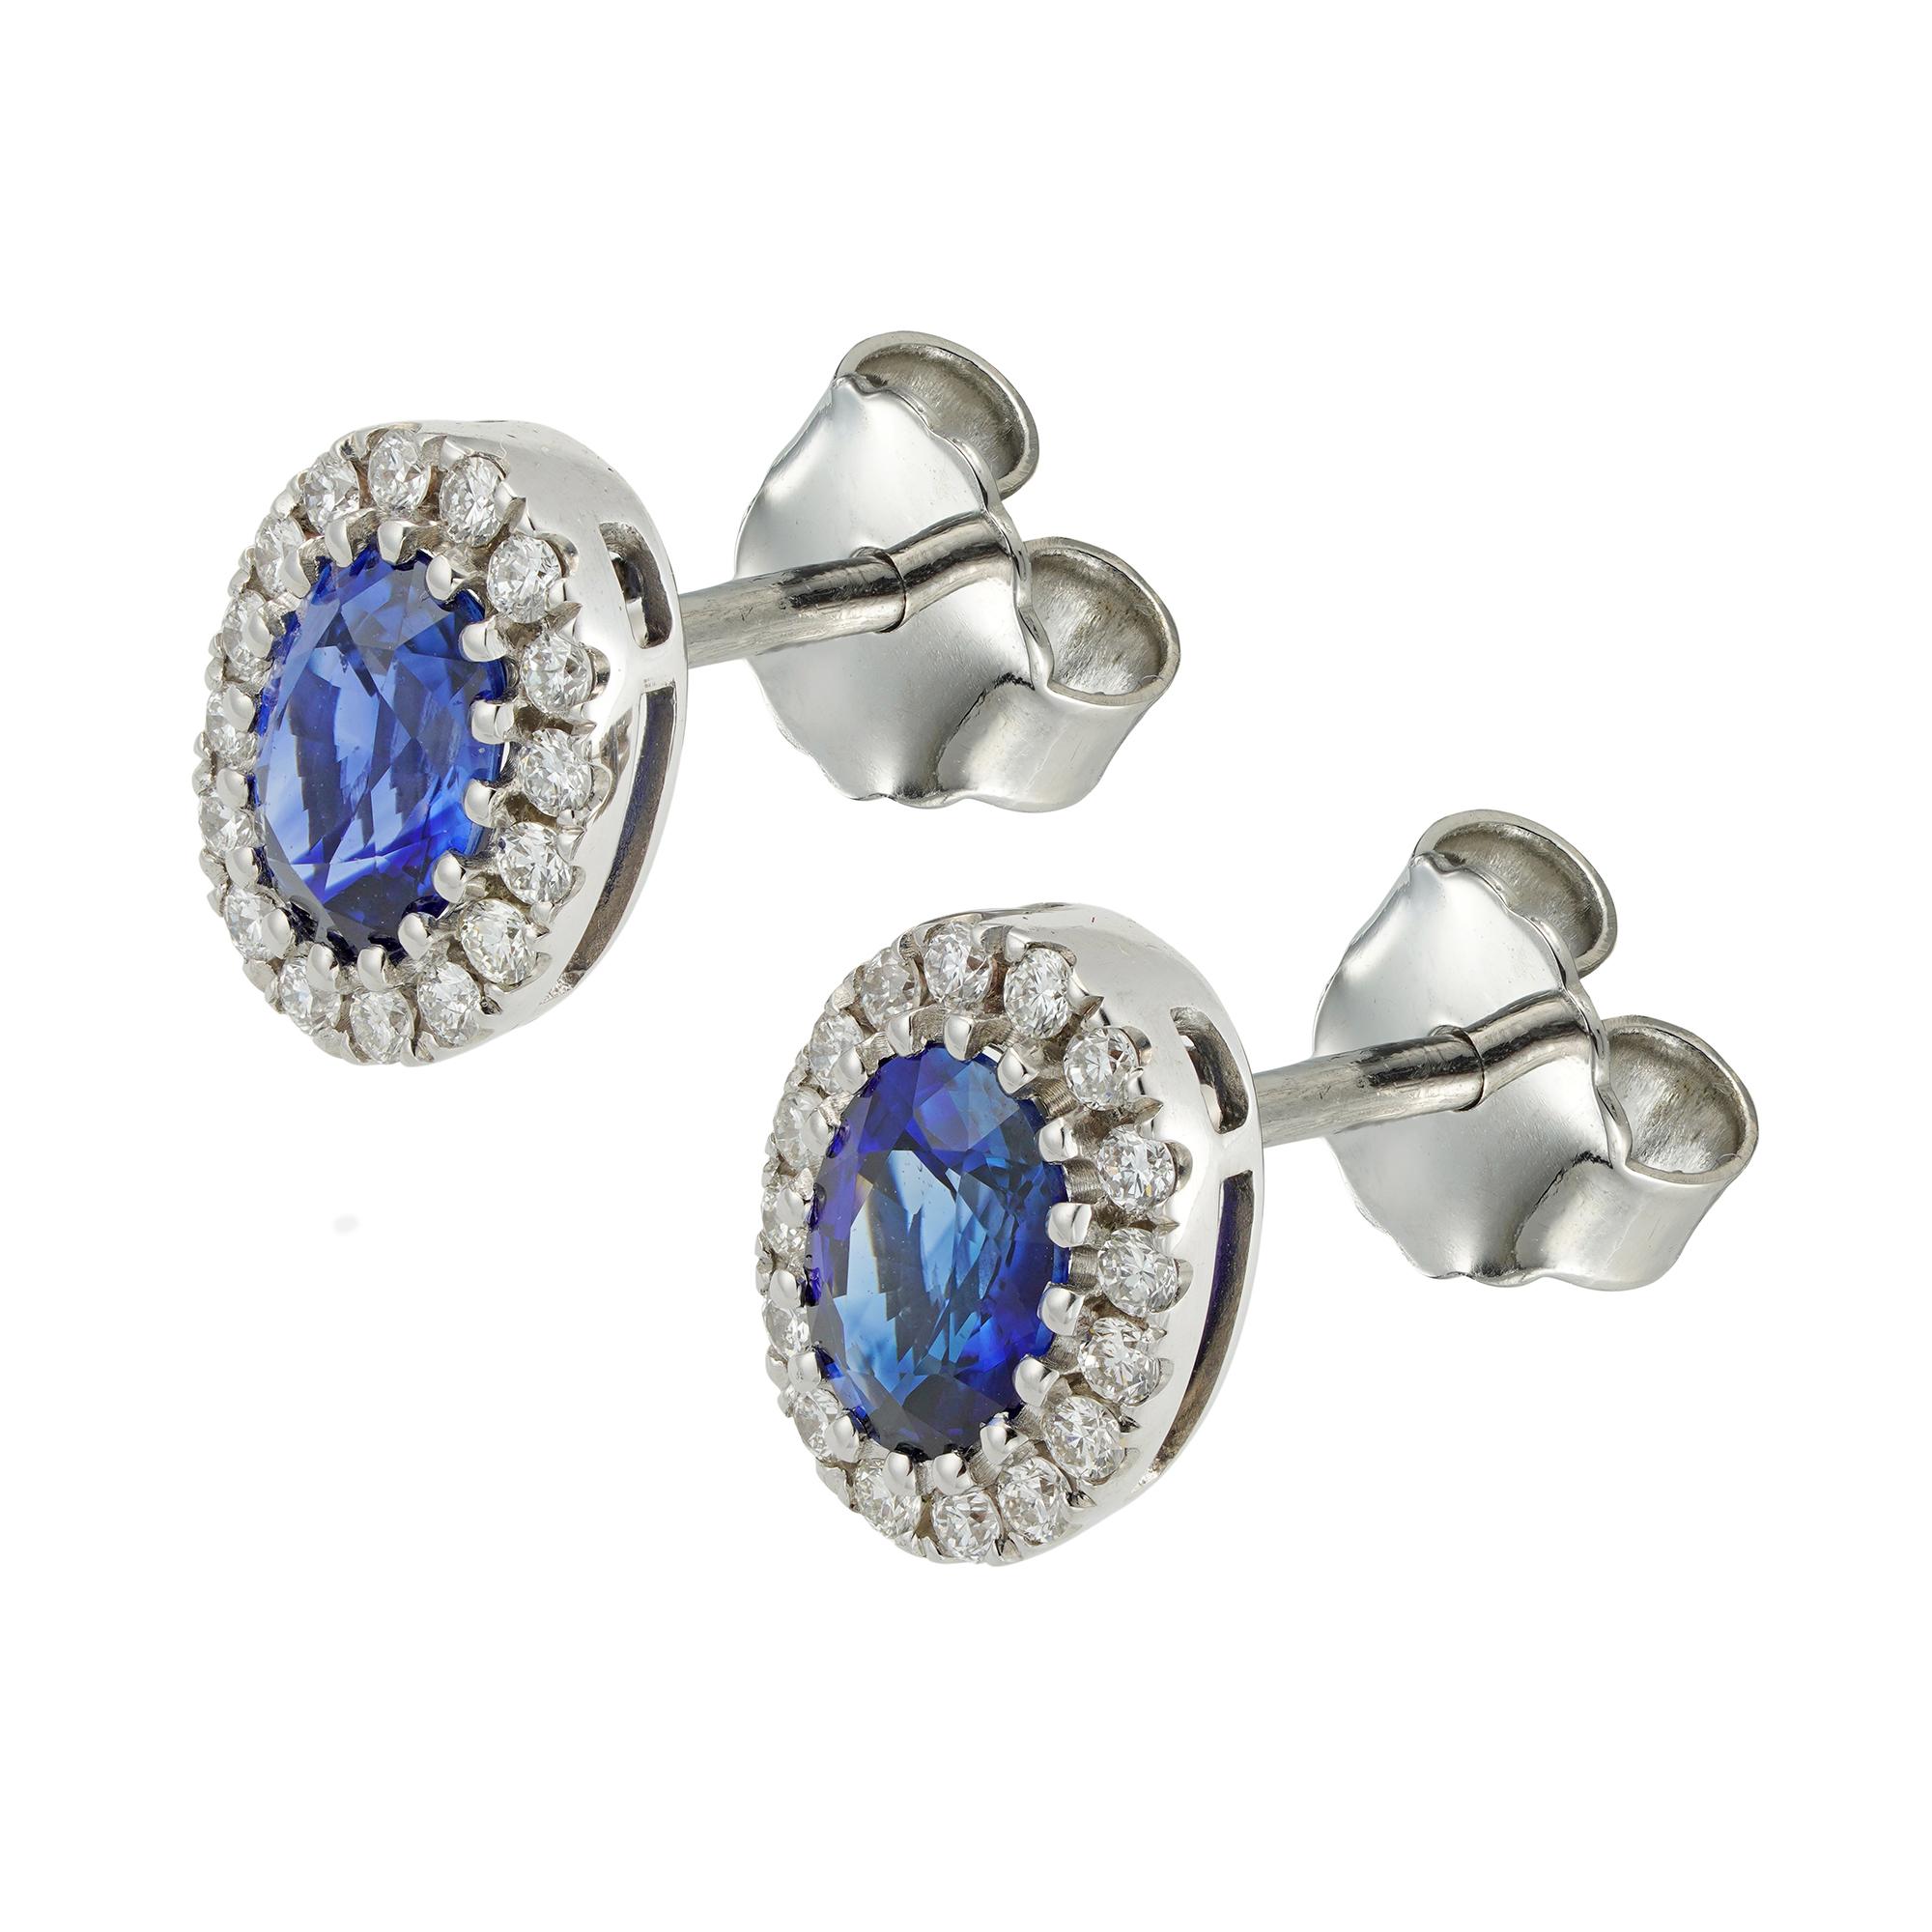 A pair of sapphire and diamond cluster earrings, each earring with an oval-cut sapphire weighing 1.48 carats the pair, surrounded by small brilliant-cut diamonds weighing 0.28 carats in total, all claw-set in white gold mount, with post and scroll